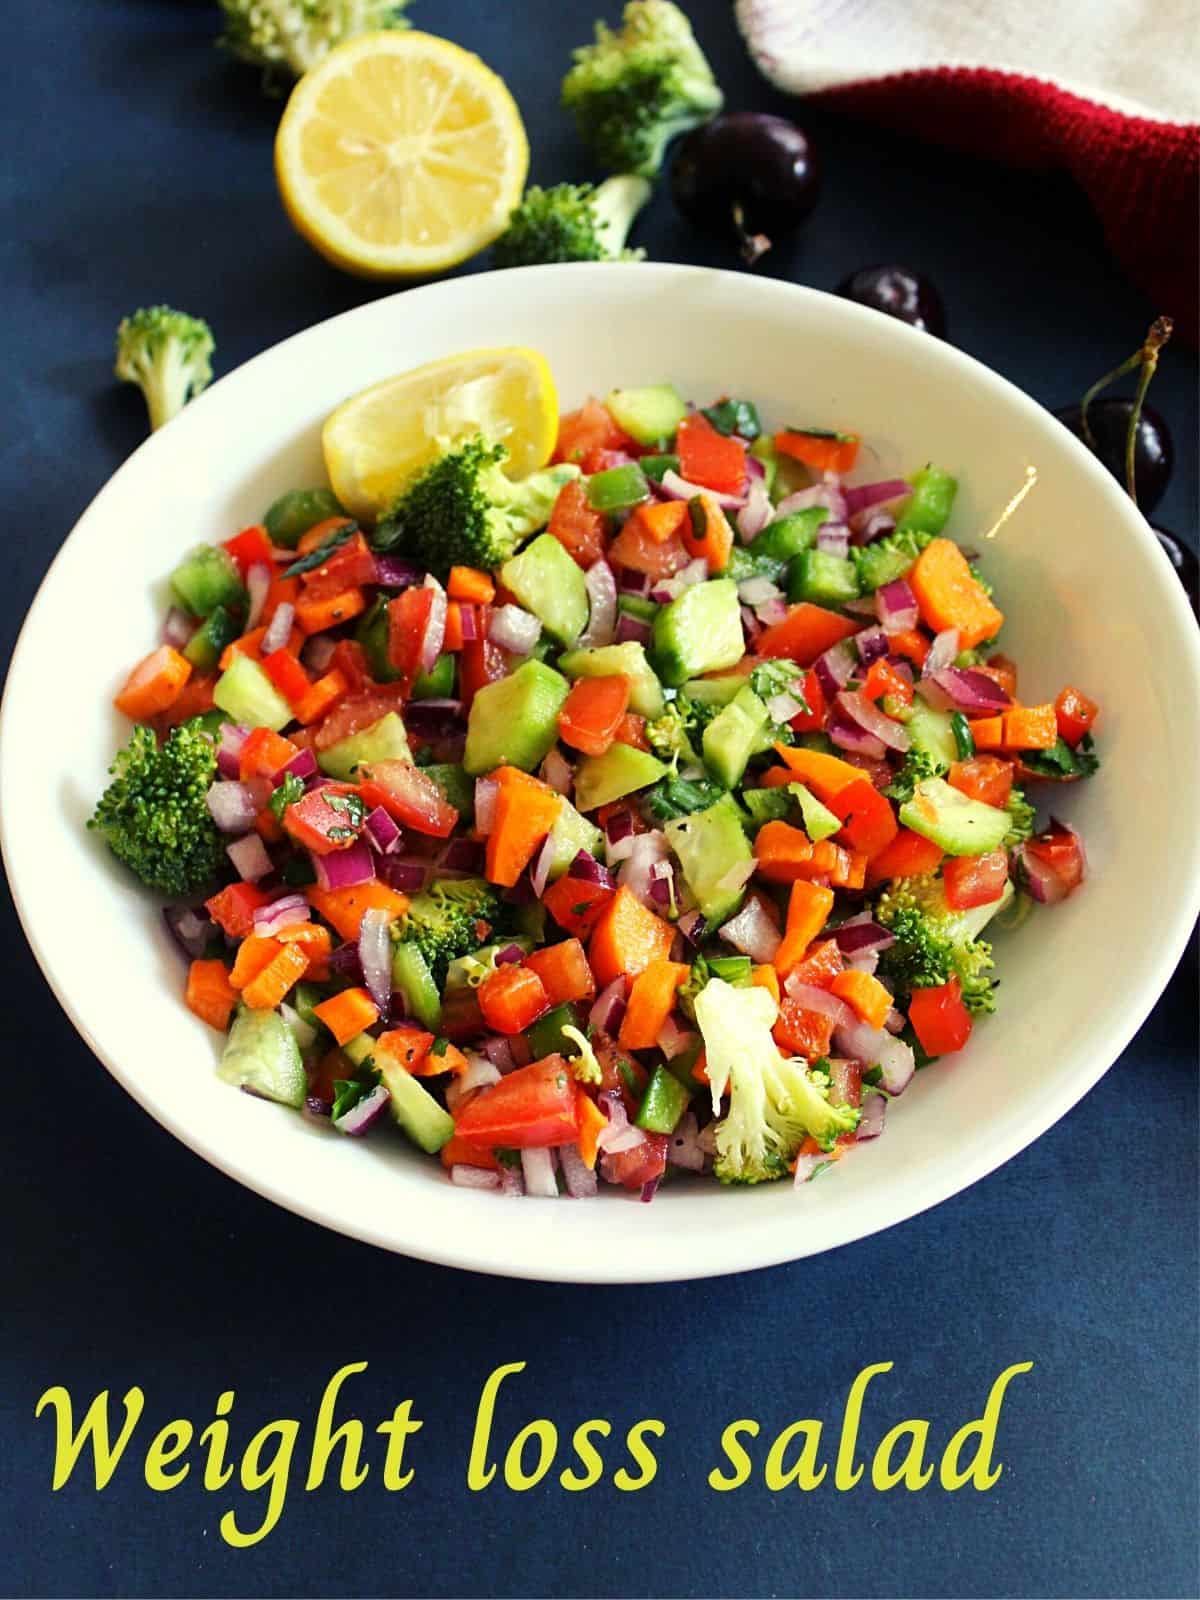 weight loss vegetable salad served in a bowl with lemon wedges placed beside